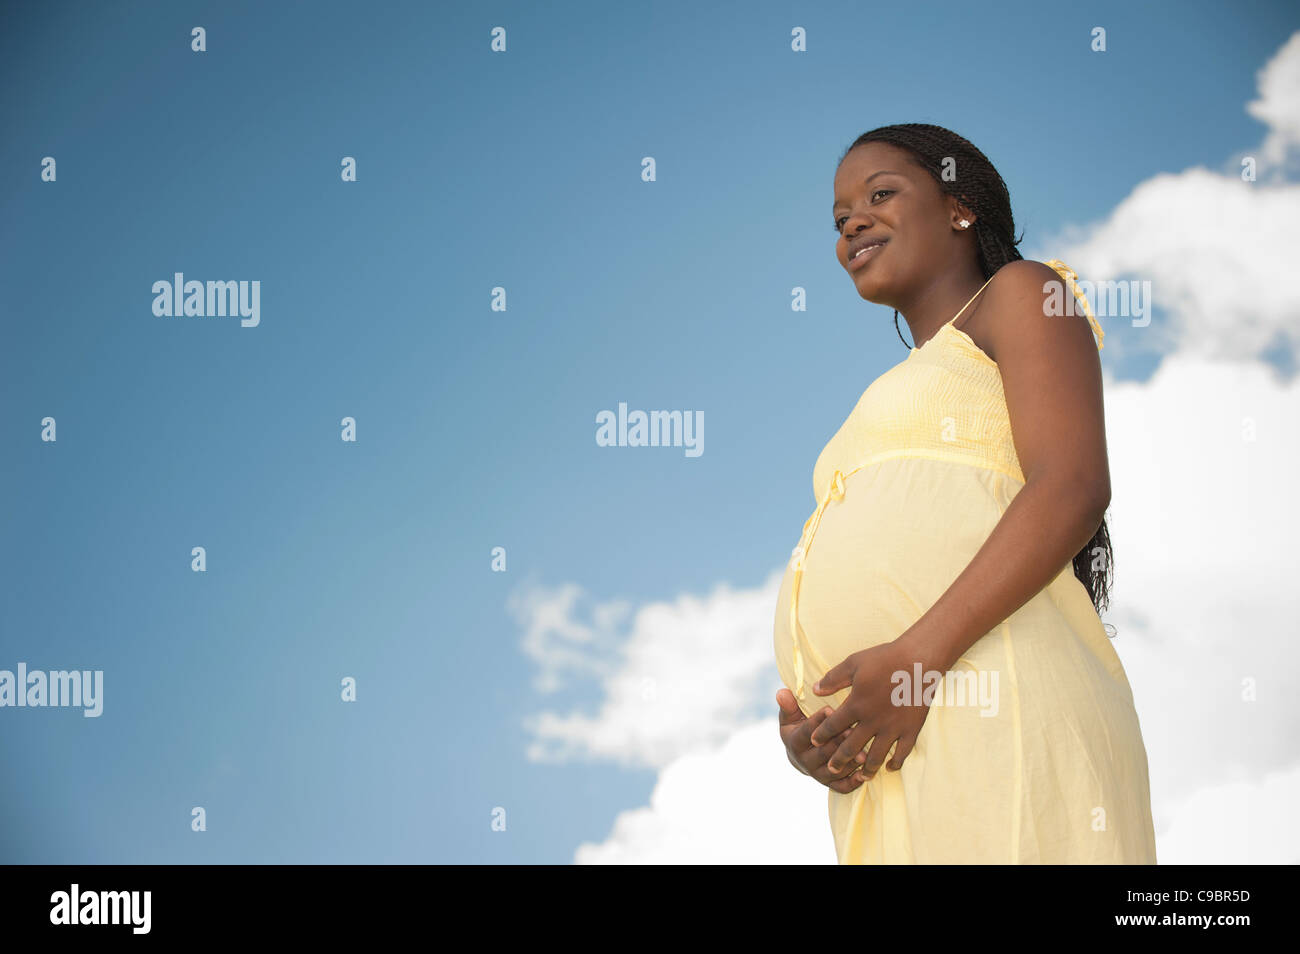 Low angle view of pregnant woman outside, Johannesburg, Gauteng Province, South Africa Stock Photo